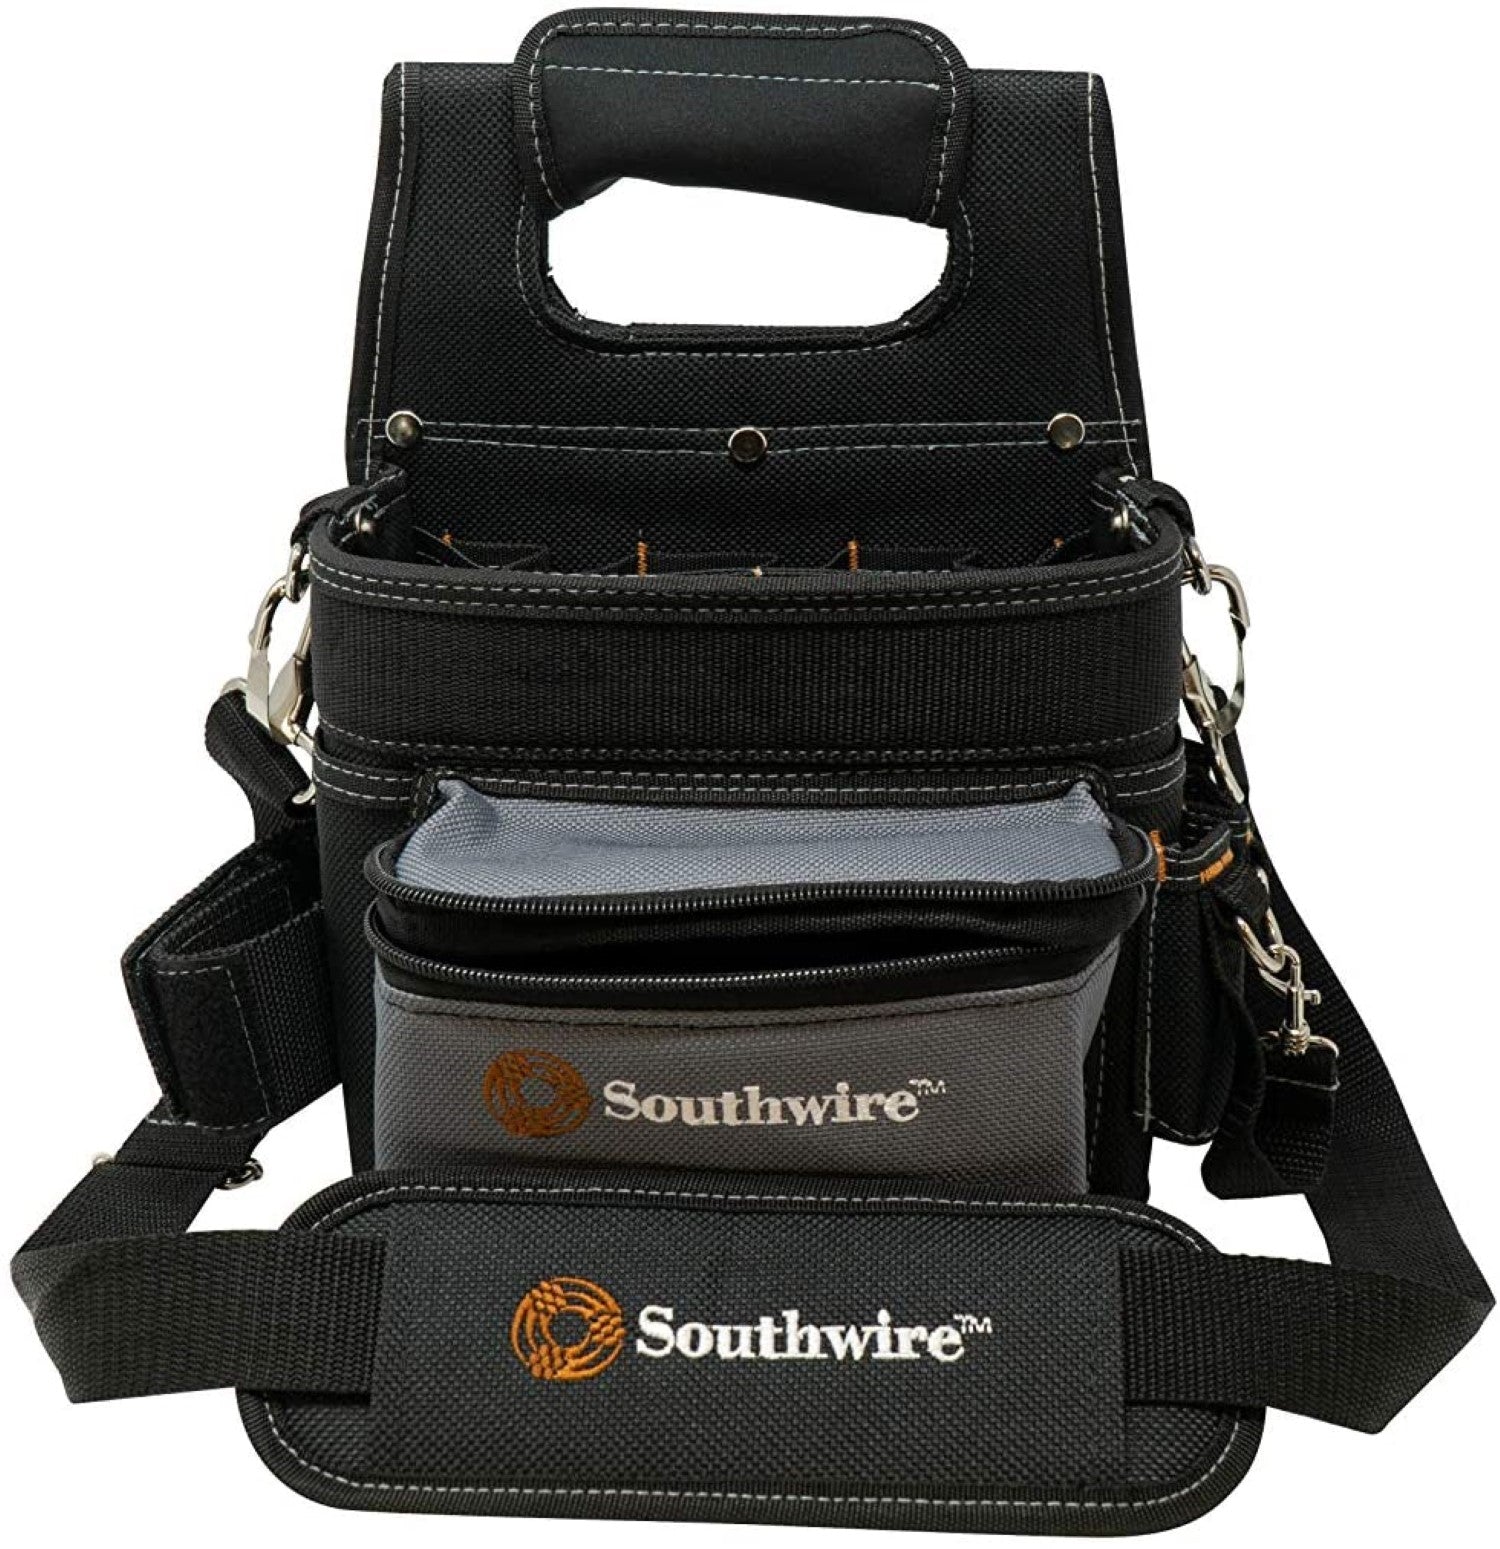 Southwire Tools & Equipment BAGESP Electrician's Shoulder Pouch Tool Carrier